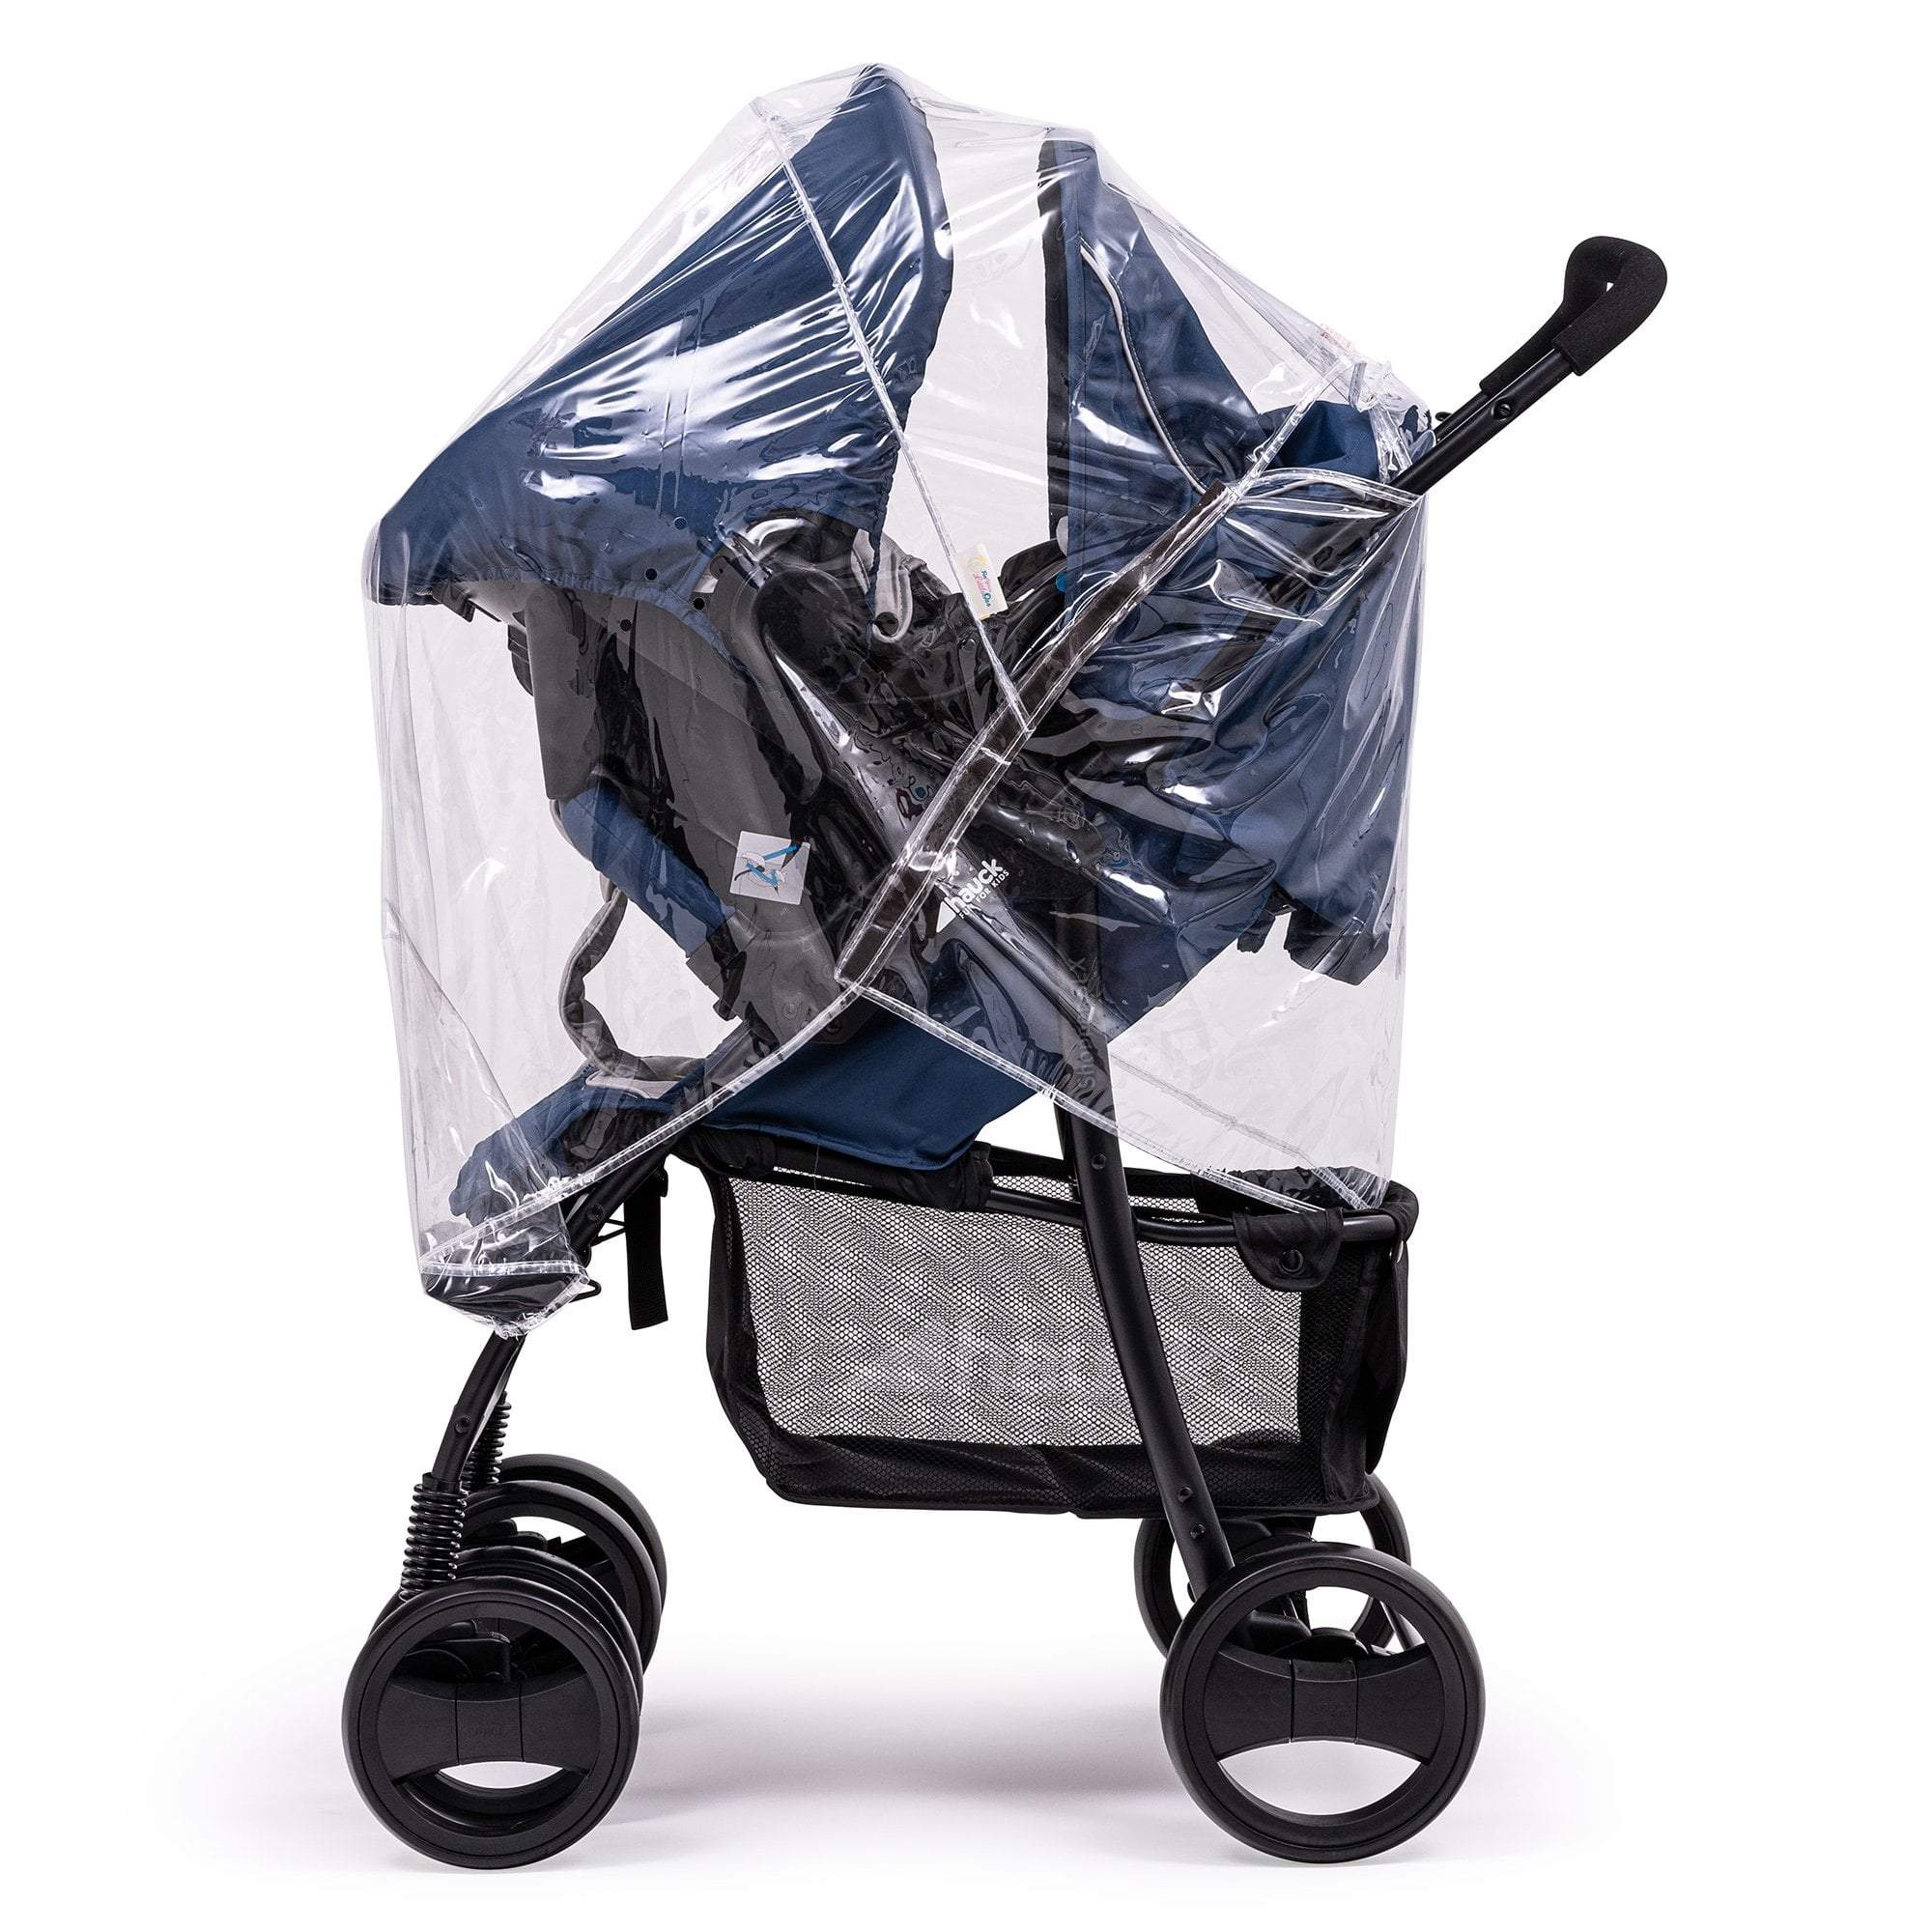 Travel System Raincover Compatible with Red Kite - Fits All Models - For Your Little One